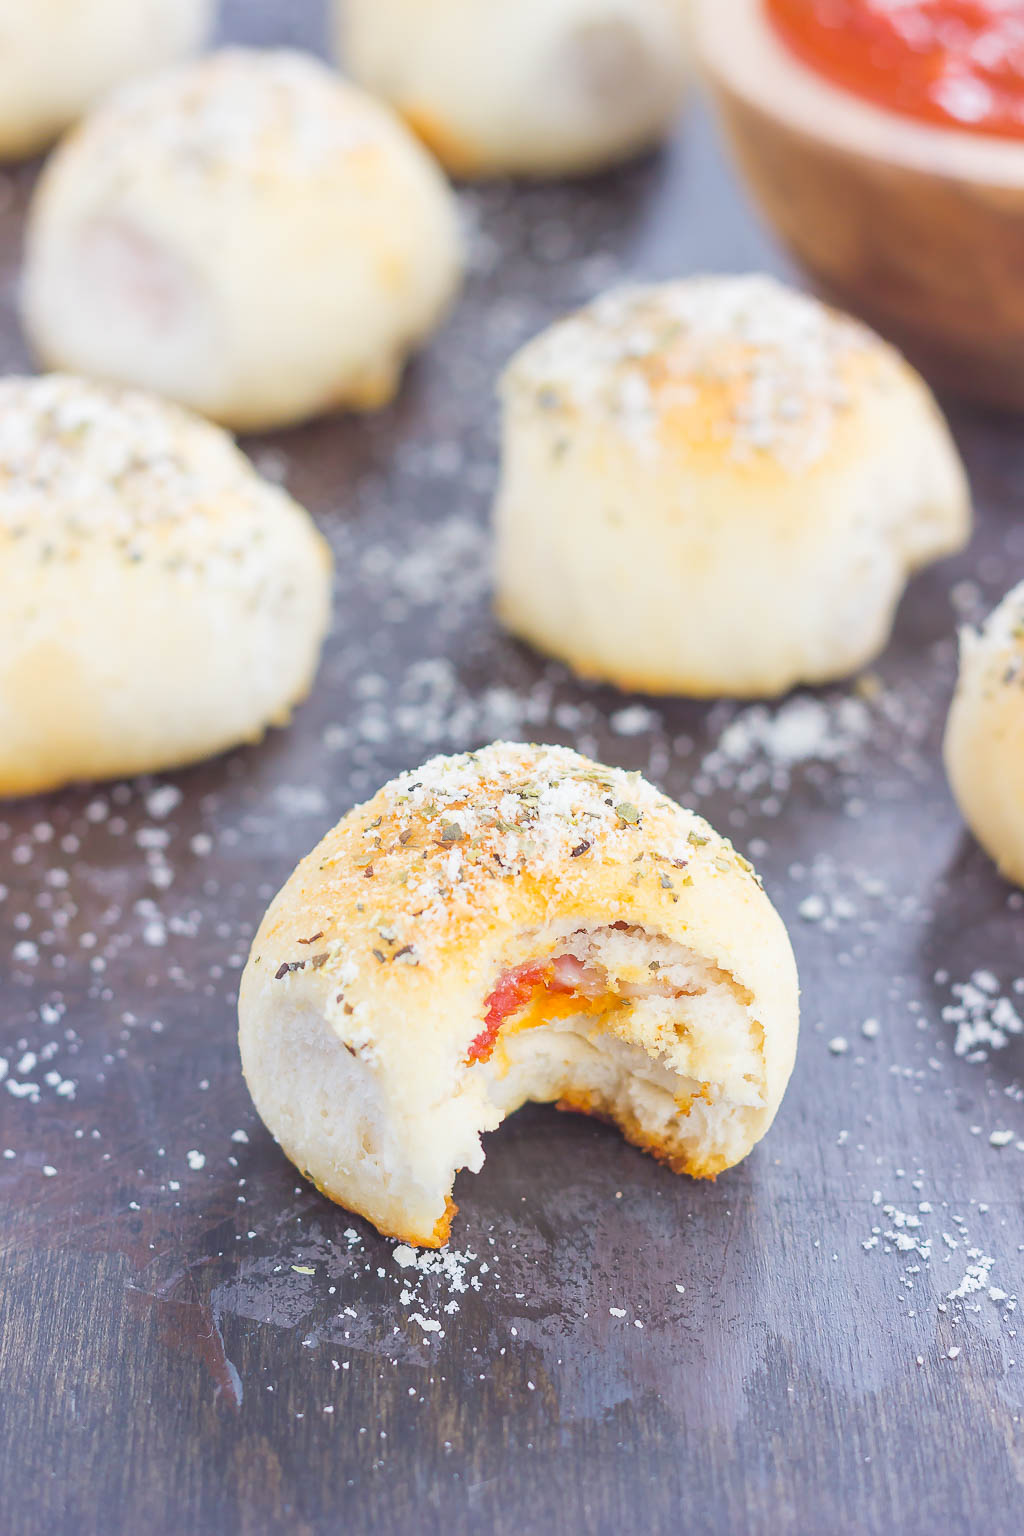 These Stuffed Pizza Rolls taste just like your favorite pizza, combined into a roll and drizzled with zesty, buttery glaze!